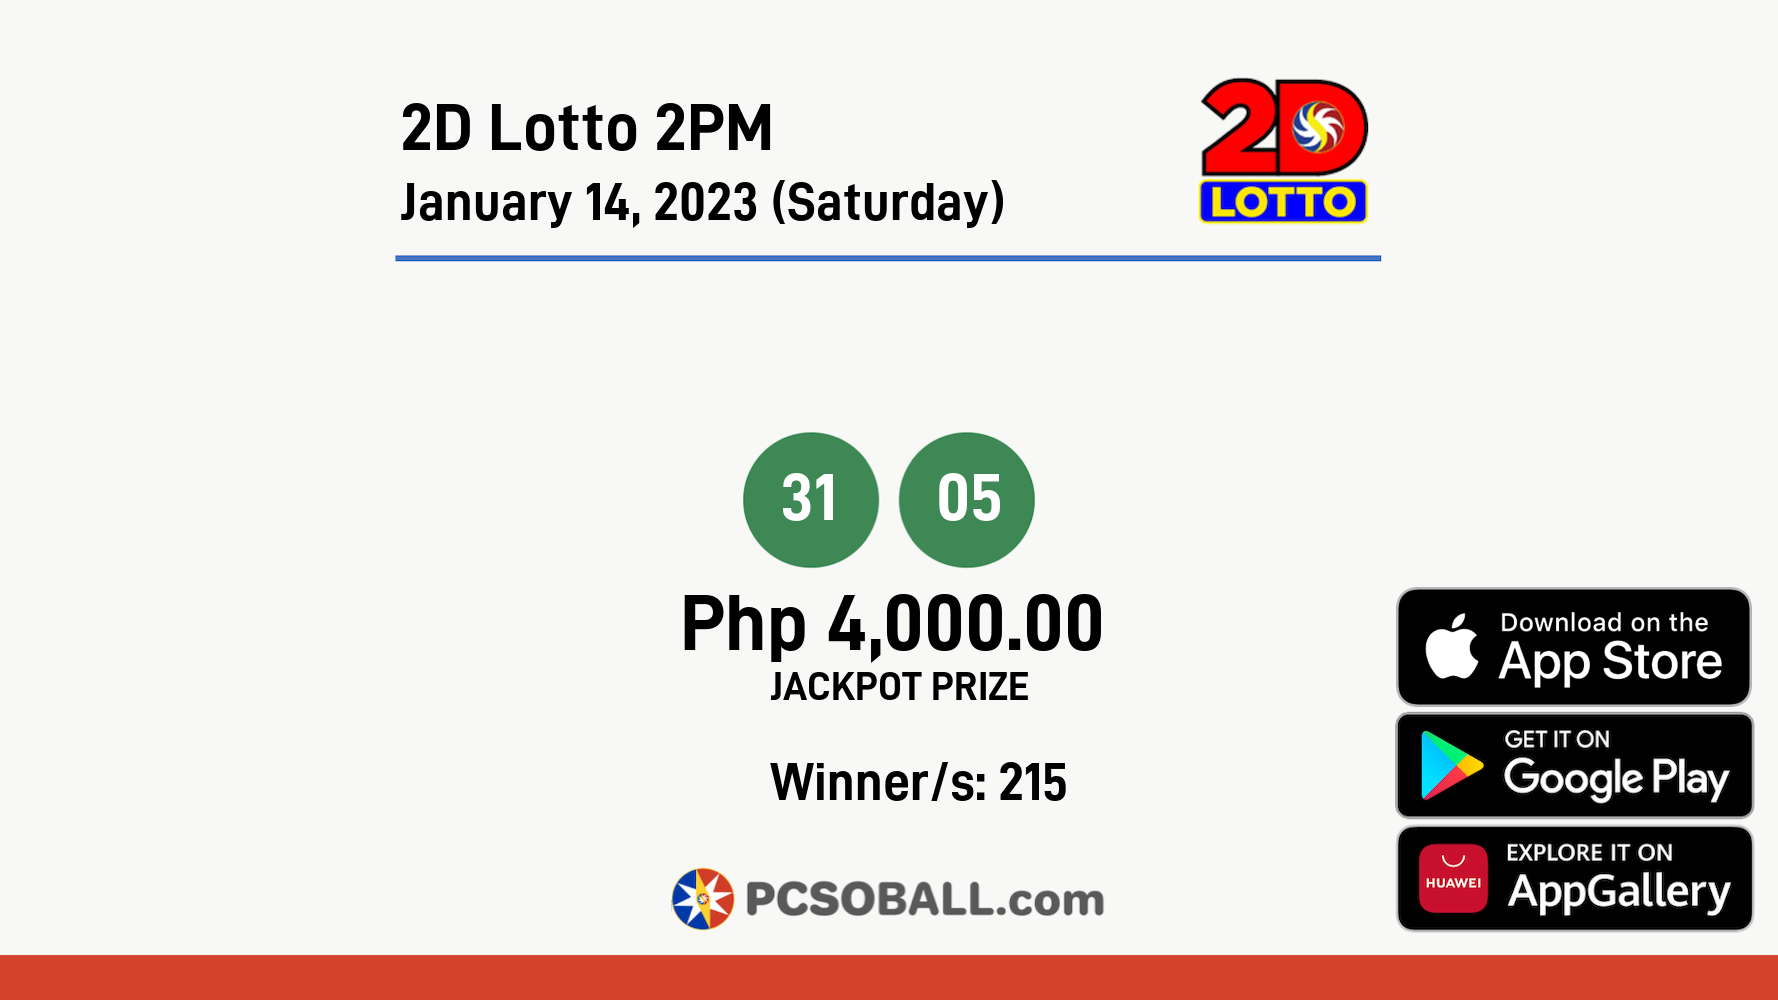 2D Lotto 2PM January 14, 2023 (Saturday) Result